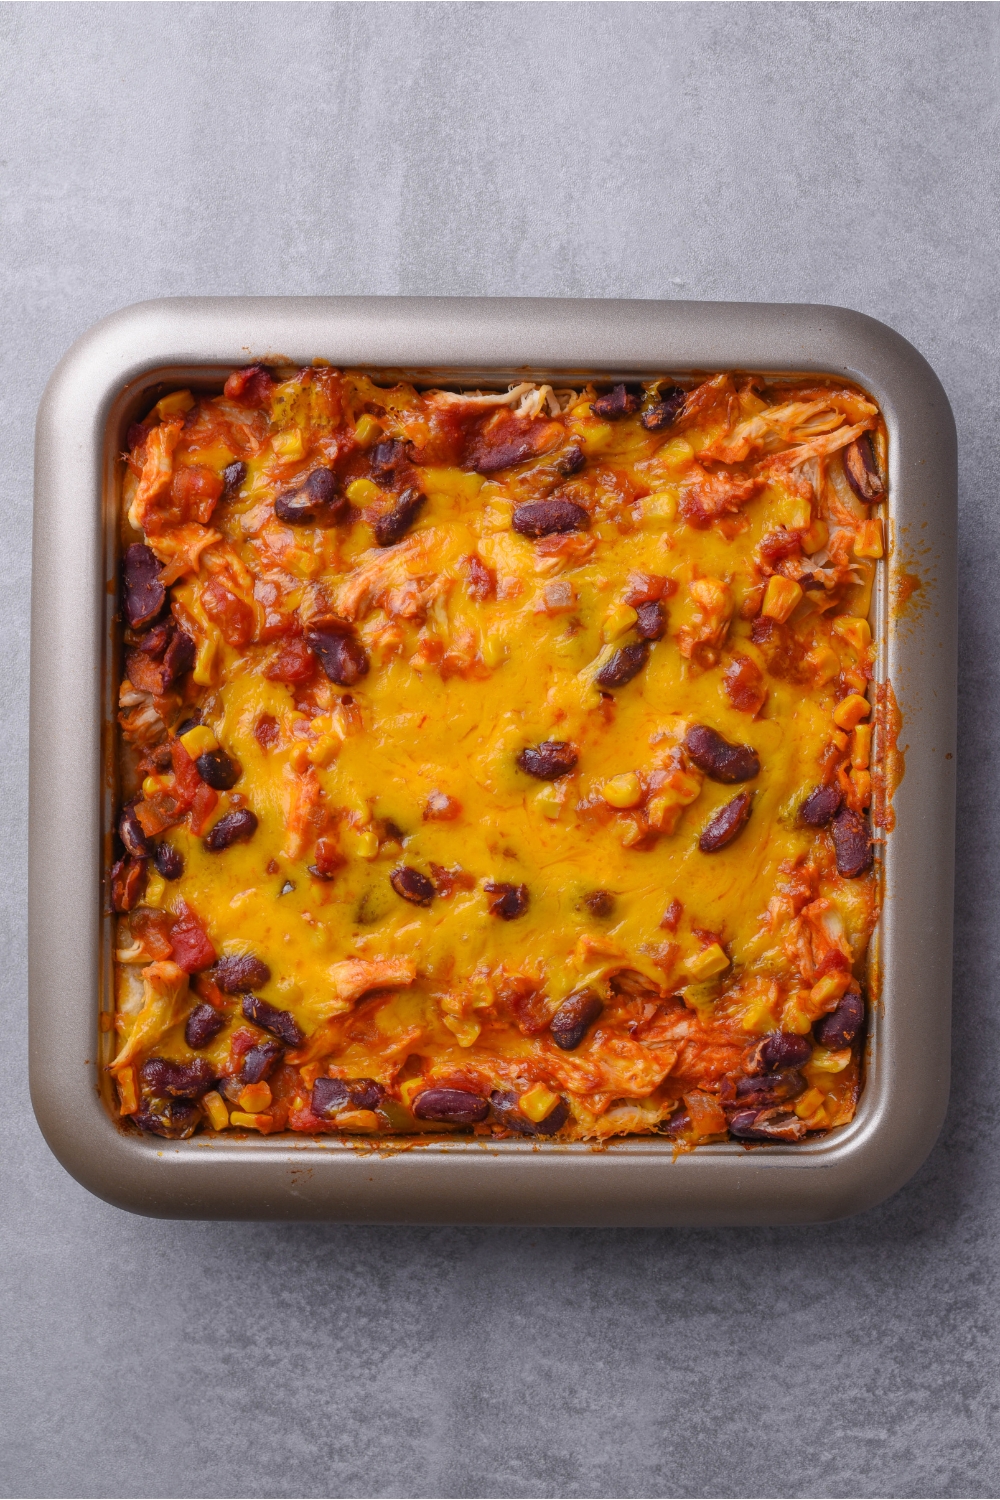 Square baking dish filled with a freshly baked casserole of shredded chicken, black beans, corn, tomato sauce, and melted cheese on top.